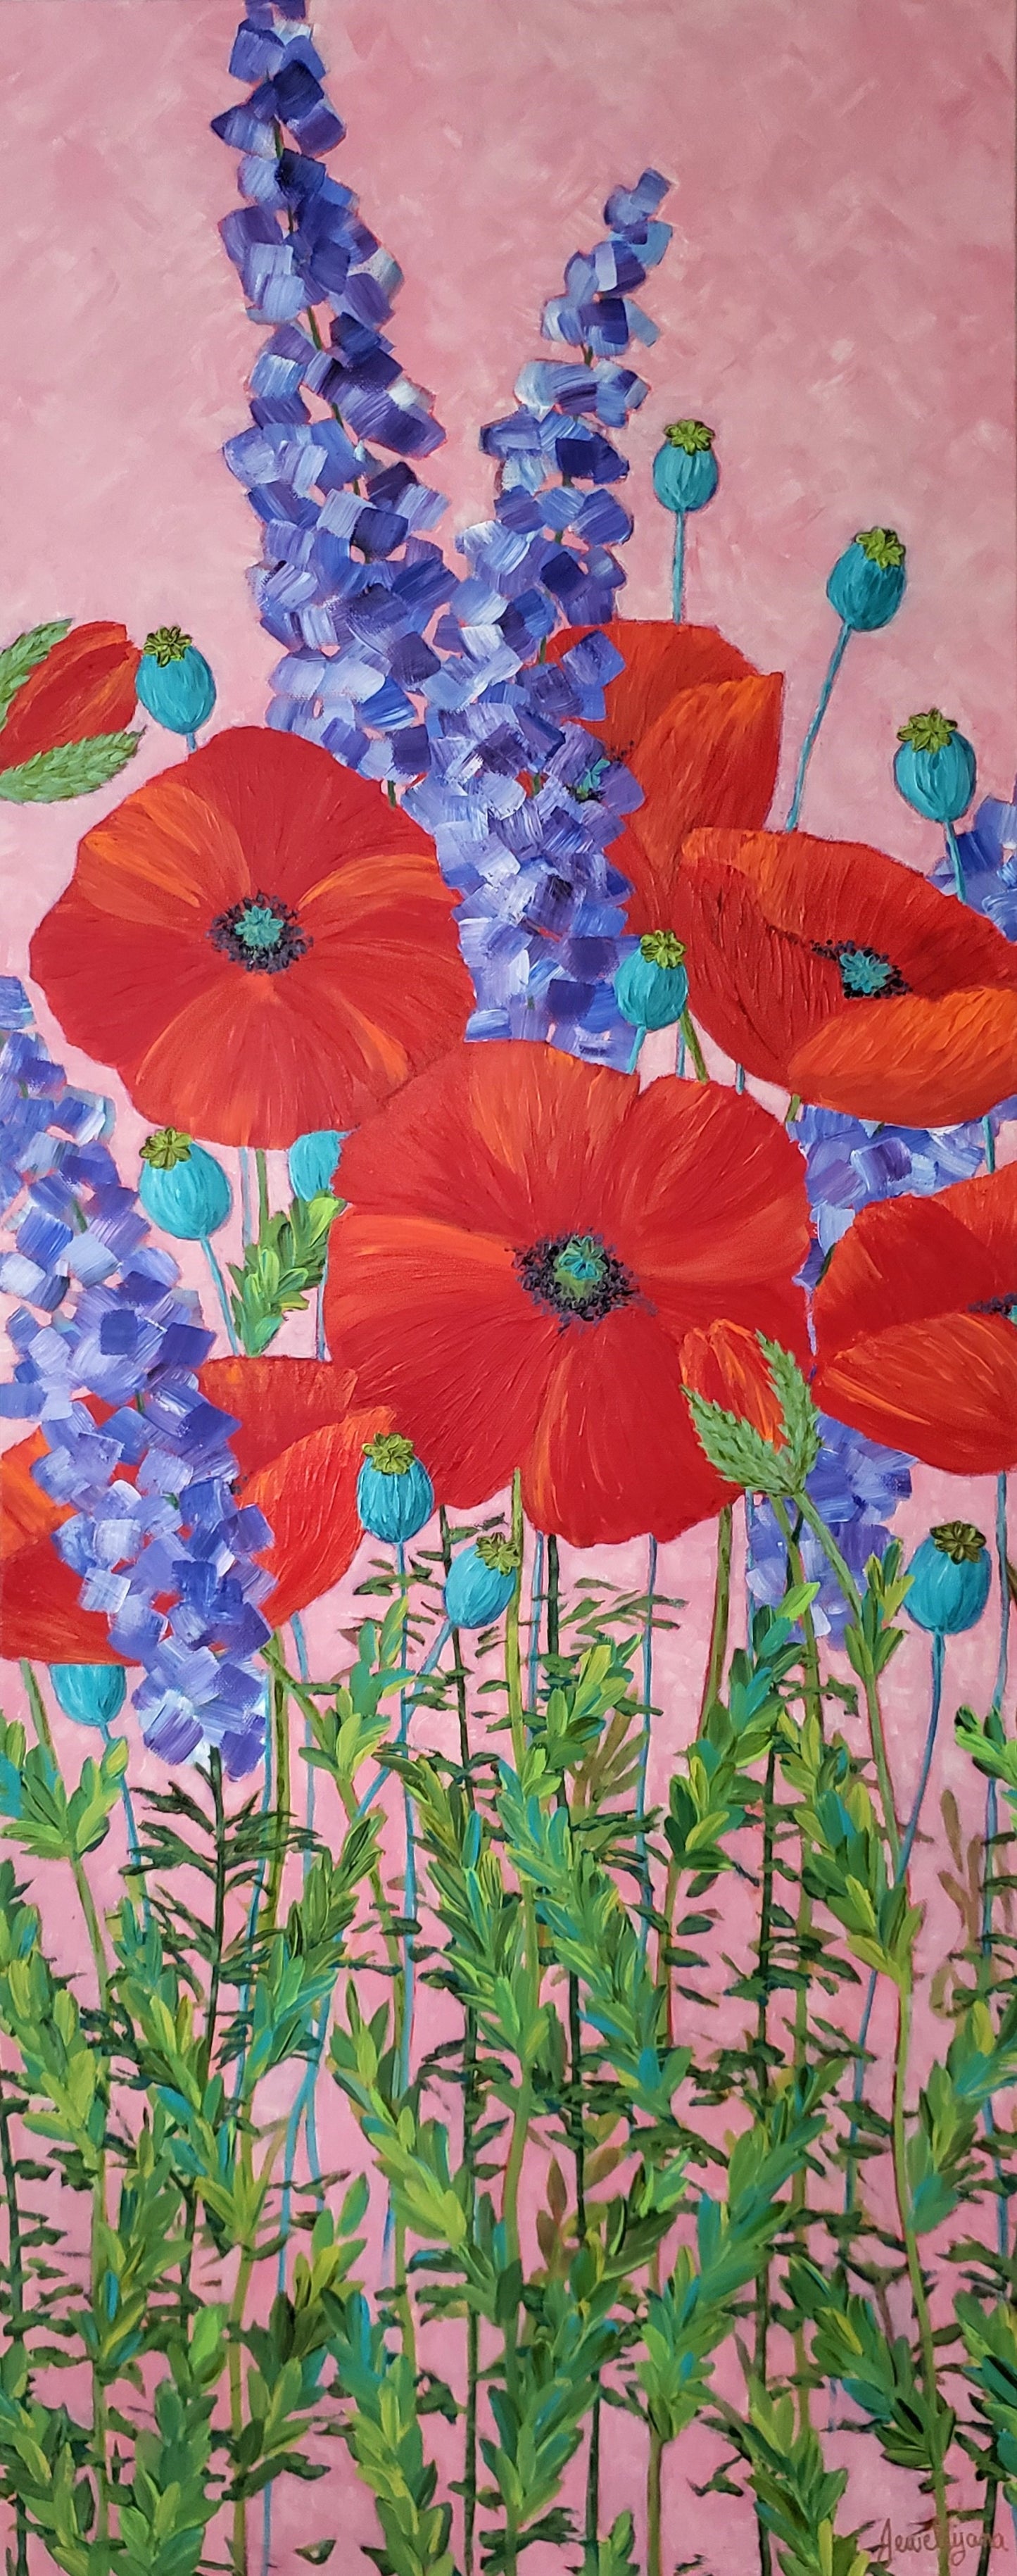 Painting of Poppies and Delphinium flowers